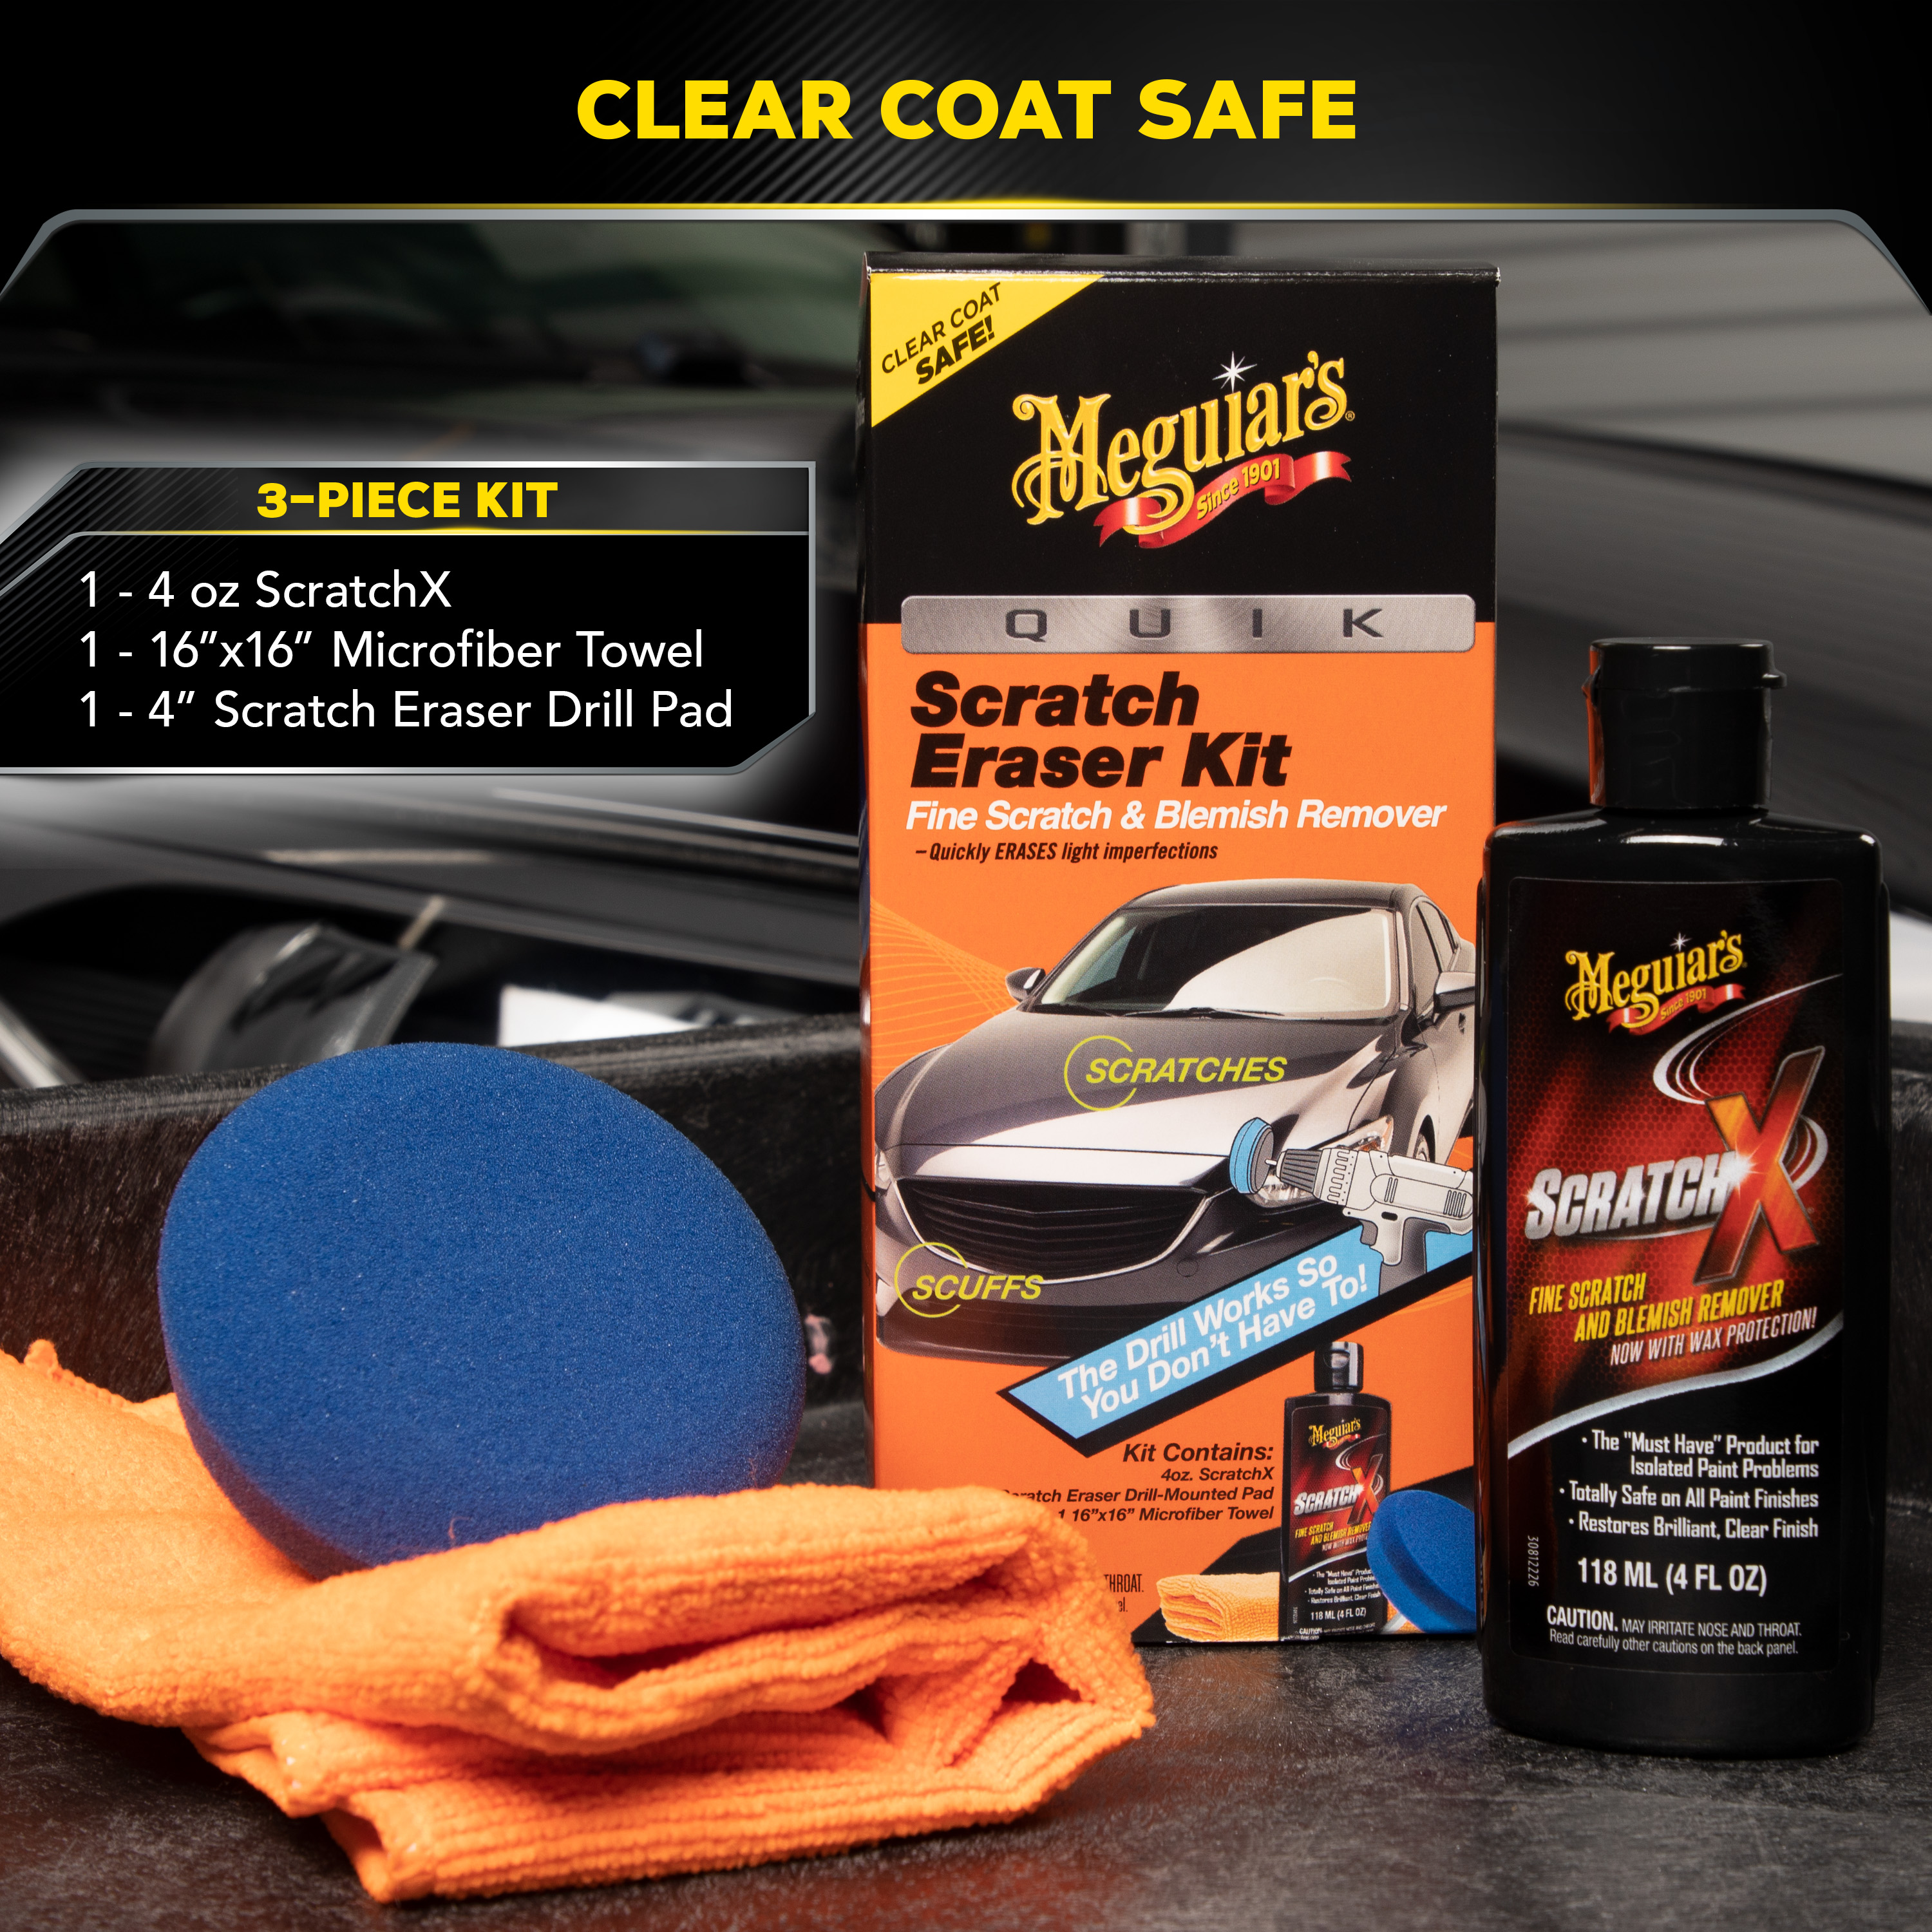 Meguiar's Quik Scratch Eraser Kit, Car Care Kit with ScratchX, Drill-Mounted Pad, and Microfiber Towel, Multi-color - image 7 of 9